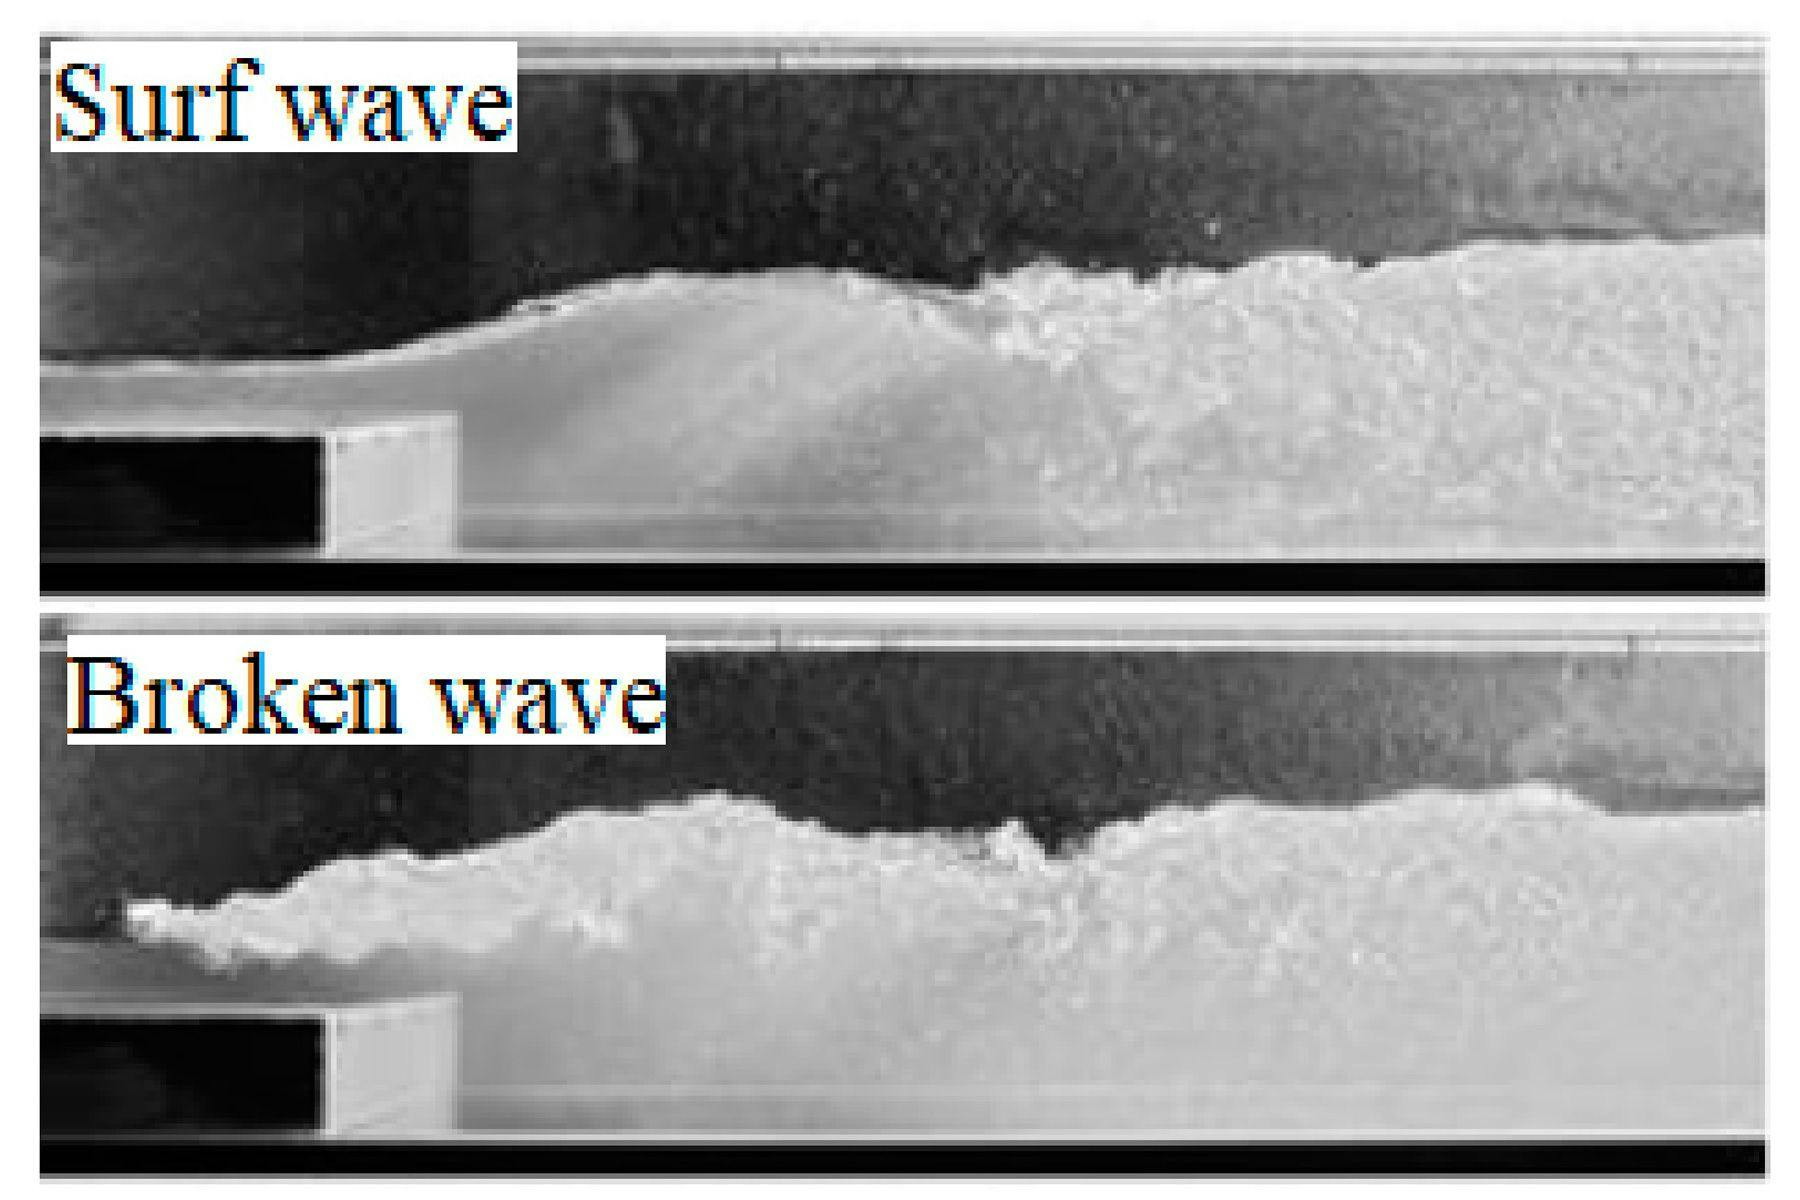 Transition from surf wave to broken wave (conventional hydraulic jump) by tailwater manipulation—photo courtesy of Wyl 